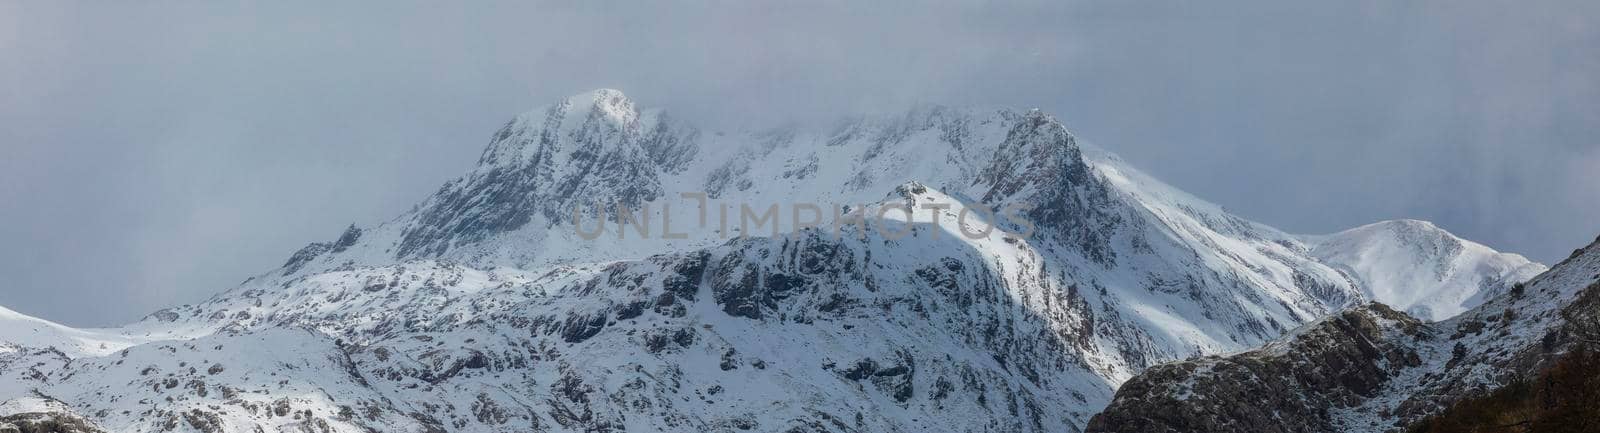 Panoramic landscape of snowy mountains in the Aragonese Pyrenees. by alvarobueno